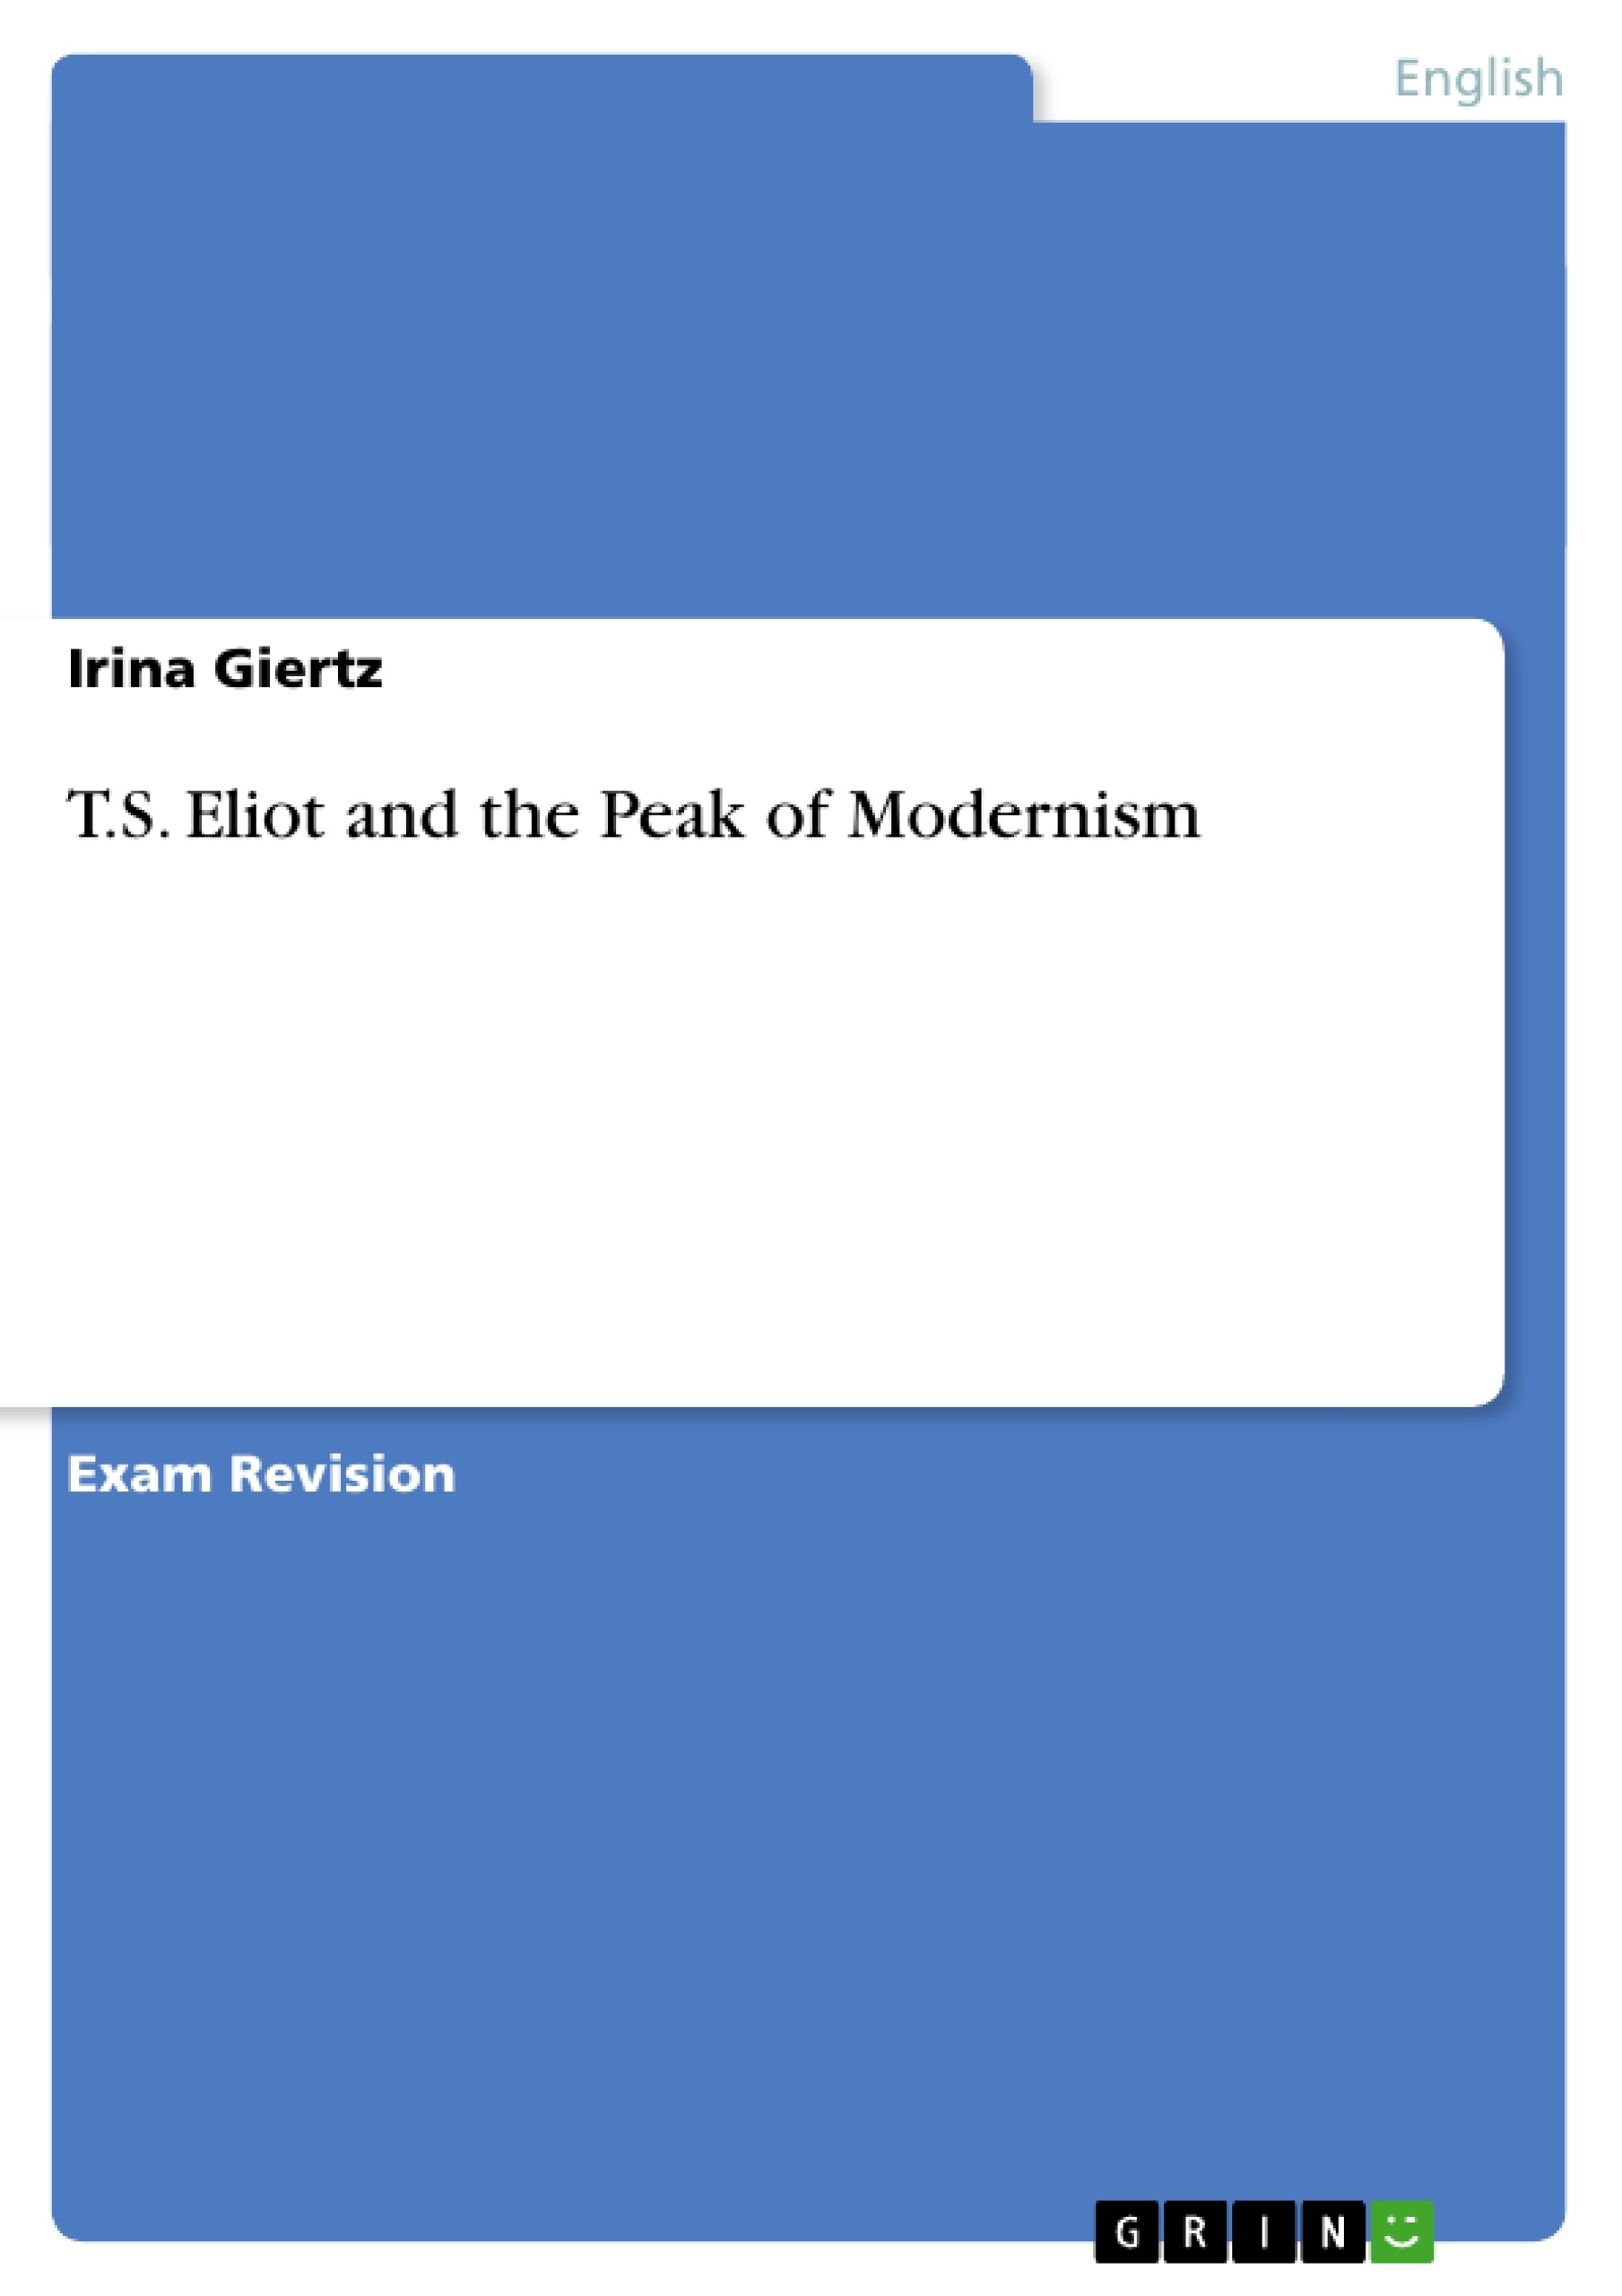 Titre: T.S. Eliot and the Peak of Modernism